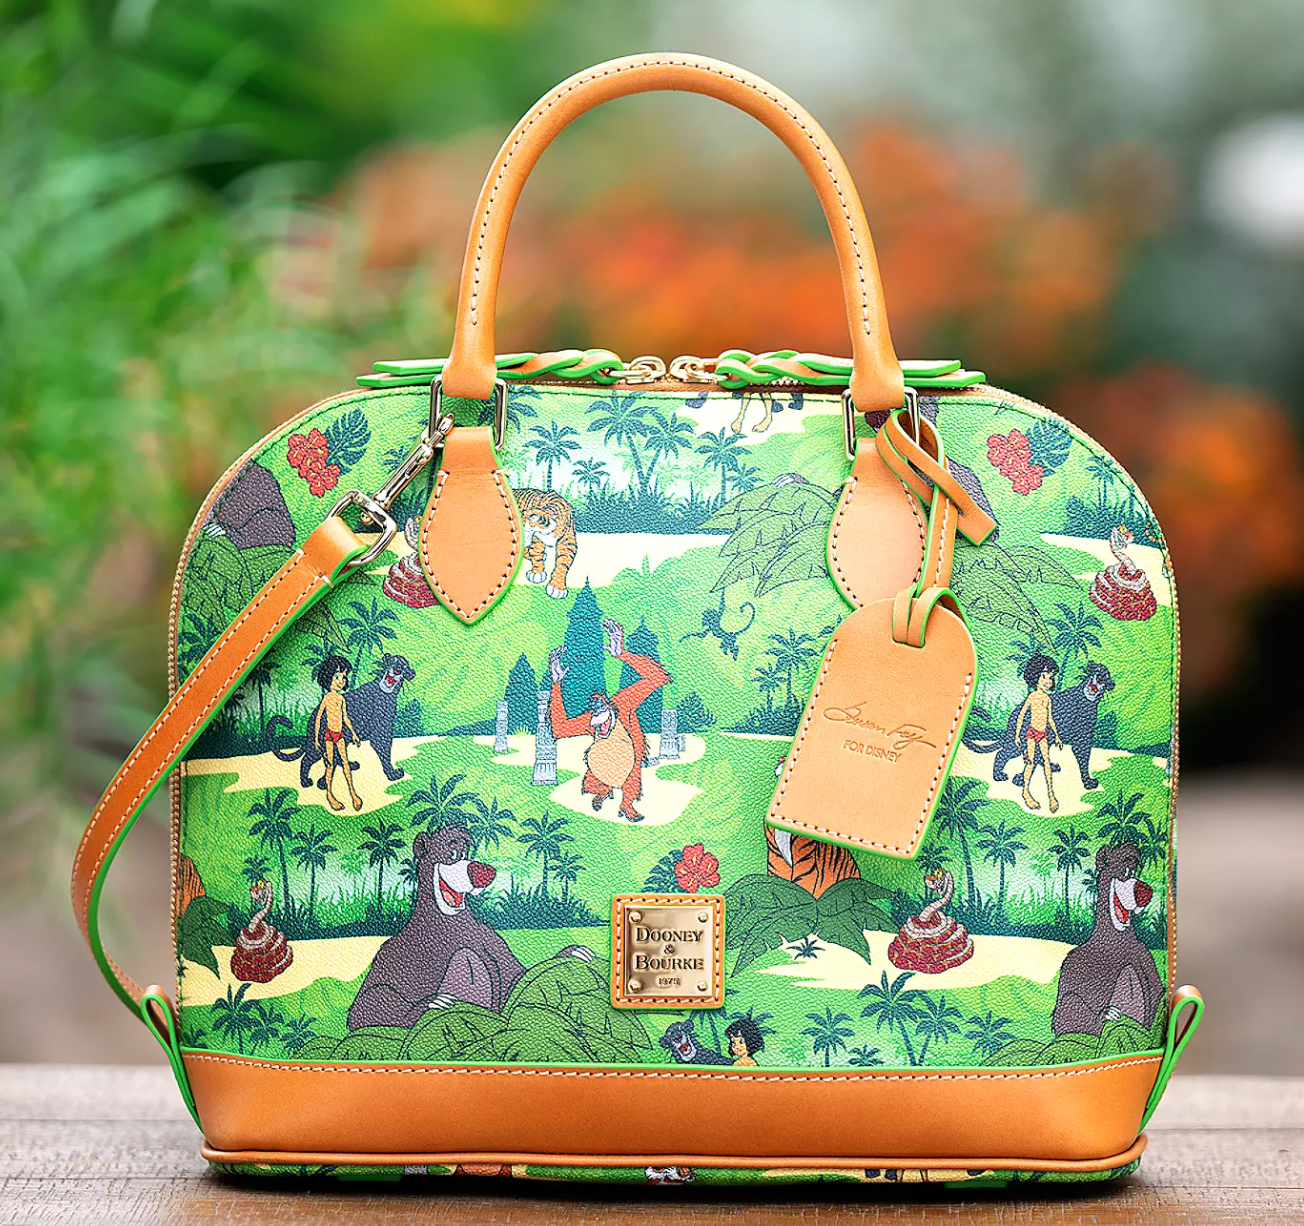 Dooney & Bourke 'The Jungle Book' Collection Arrives at Walt